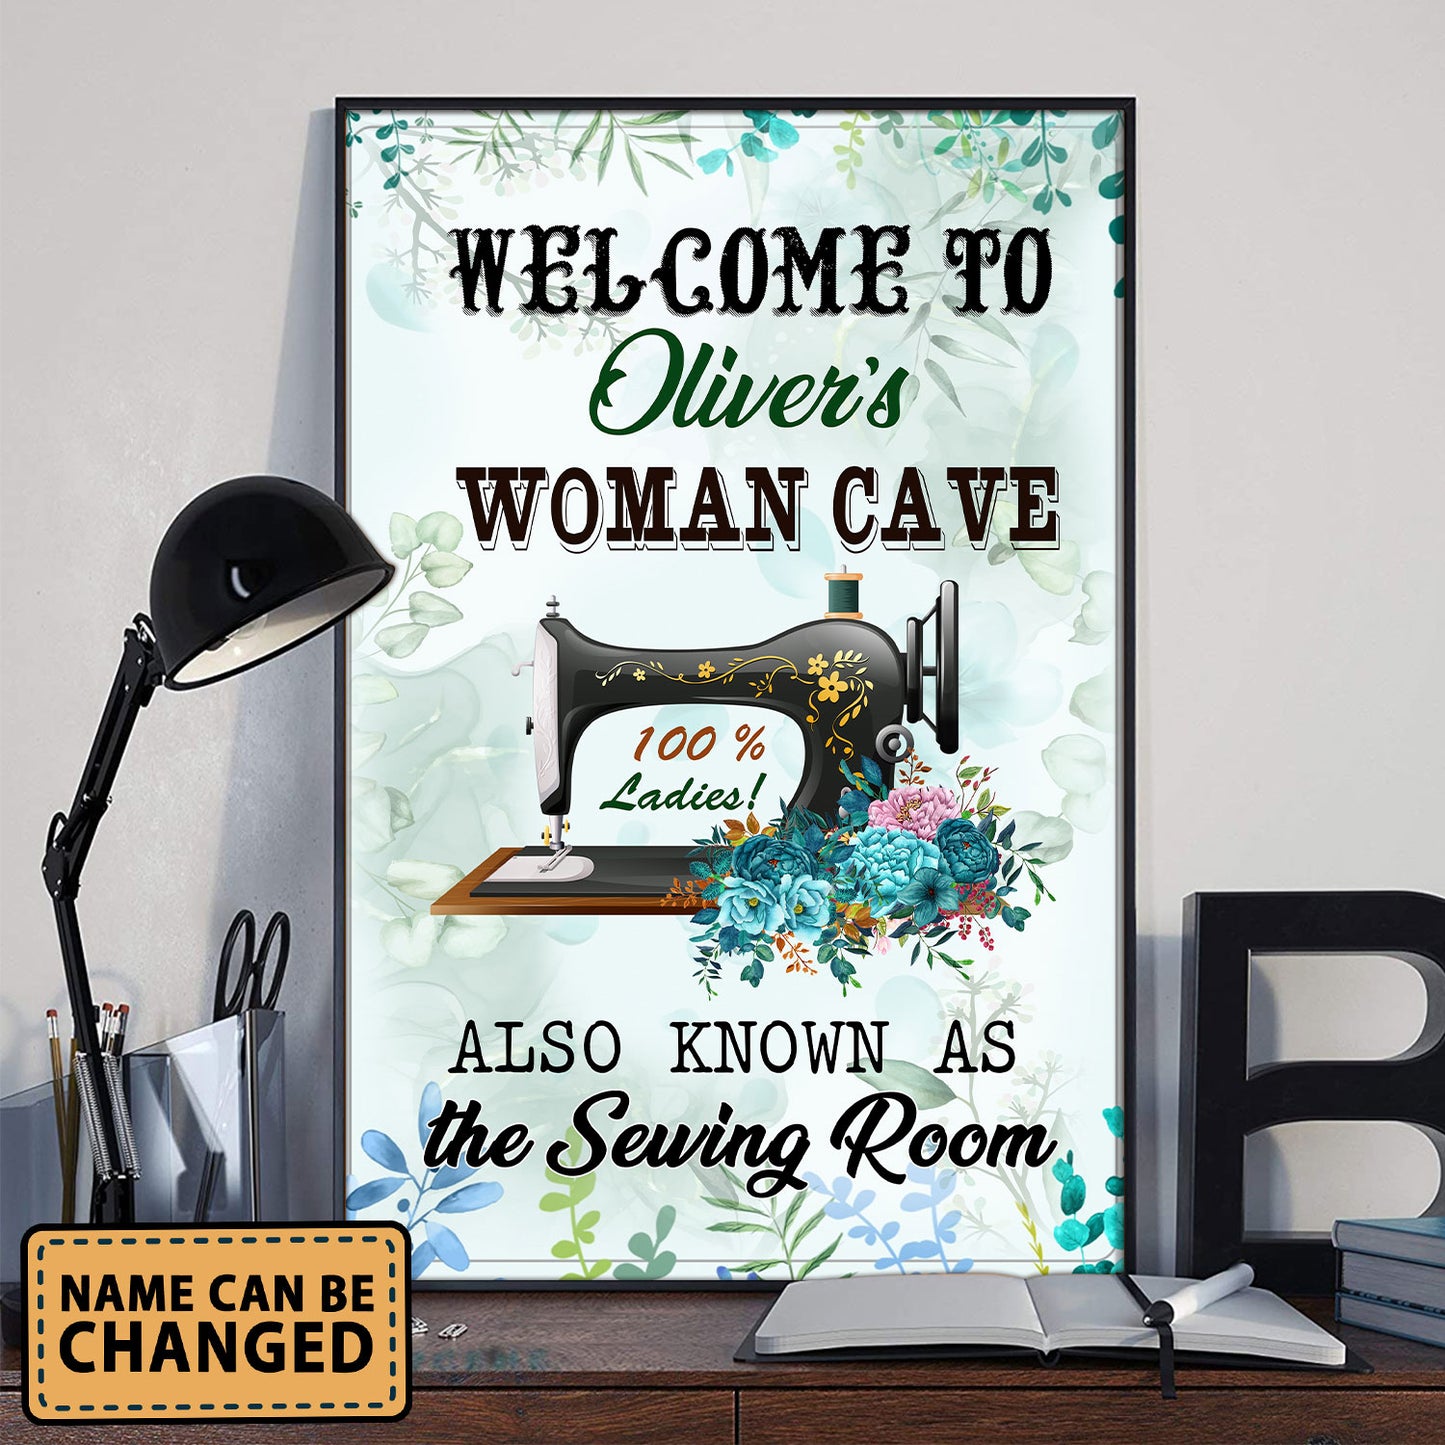 Welcome To Woman Cave Also As Know As Vertical Poster 3